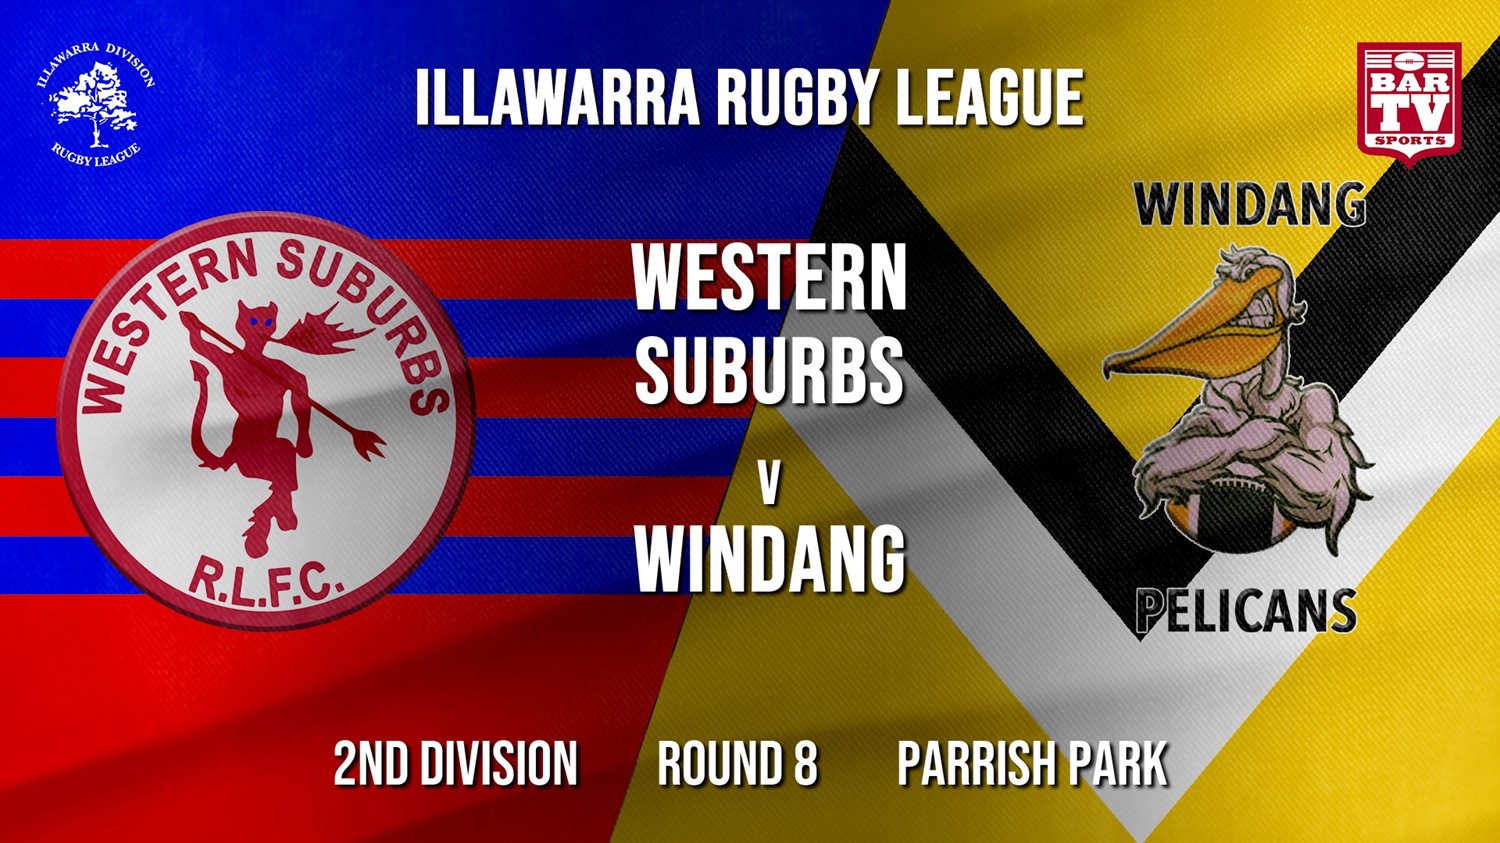 IRL Round 8 - 2nd Division - Western Suburbs Devils v Windang Pelicans Minigame Slate Image